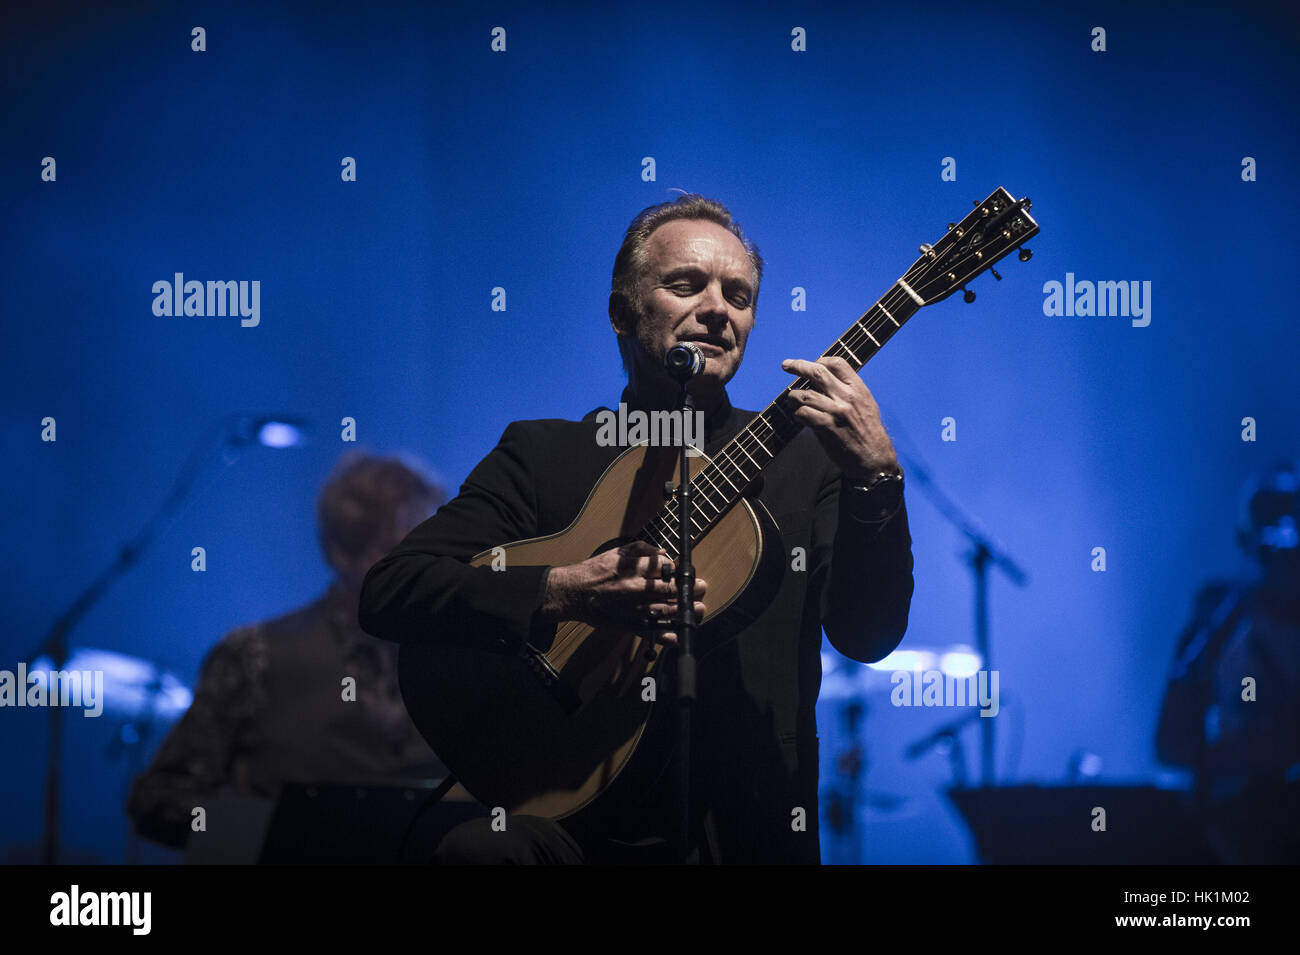 Los Angeles, USA. 24th Jan, 2017. Celebrating Bowie Tour live at the Wiltern Theatre featuring friends and former bandmates of David Bowie including Mike Garson, Earl Slick, Adrian Belew, Mark Plati, Gail Ann Dorsey, Sterling Campbell, Holly Palmer and Carmine Rojas. Credit: ZUMA Press, Inc./Alamy Live News Stock Photo